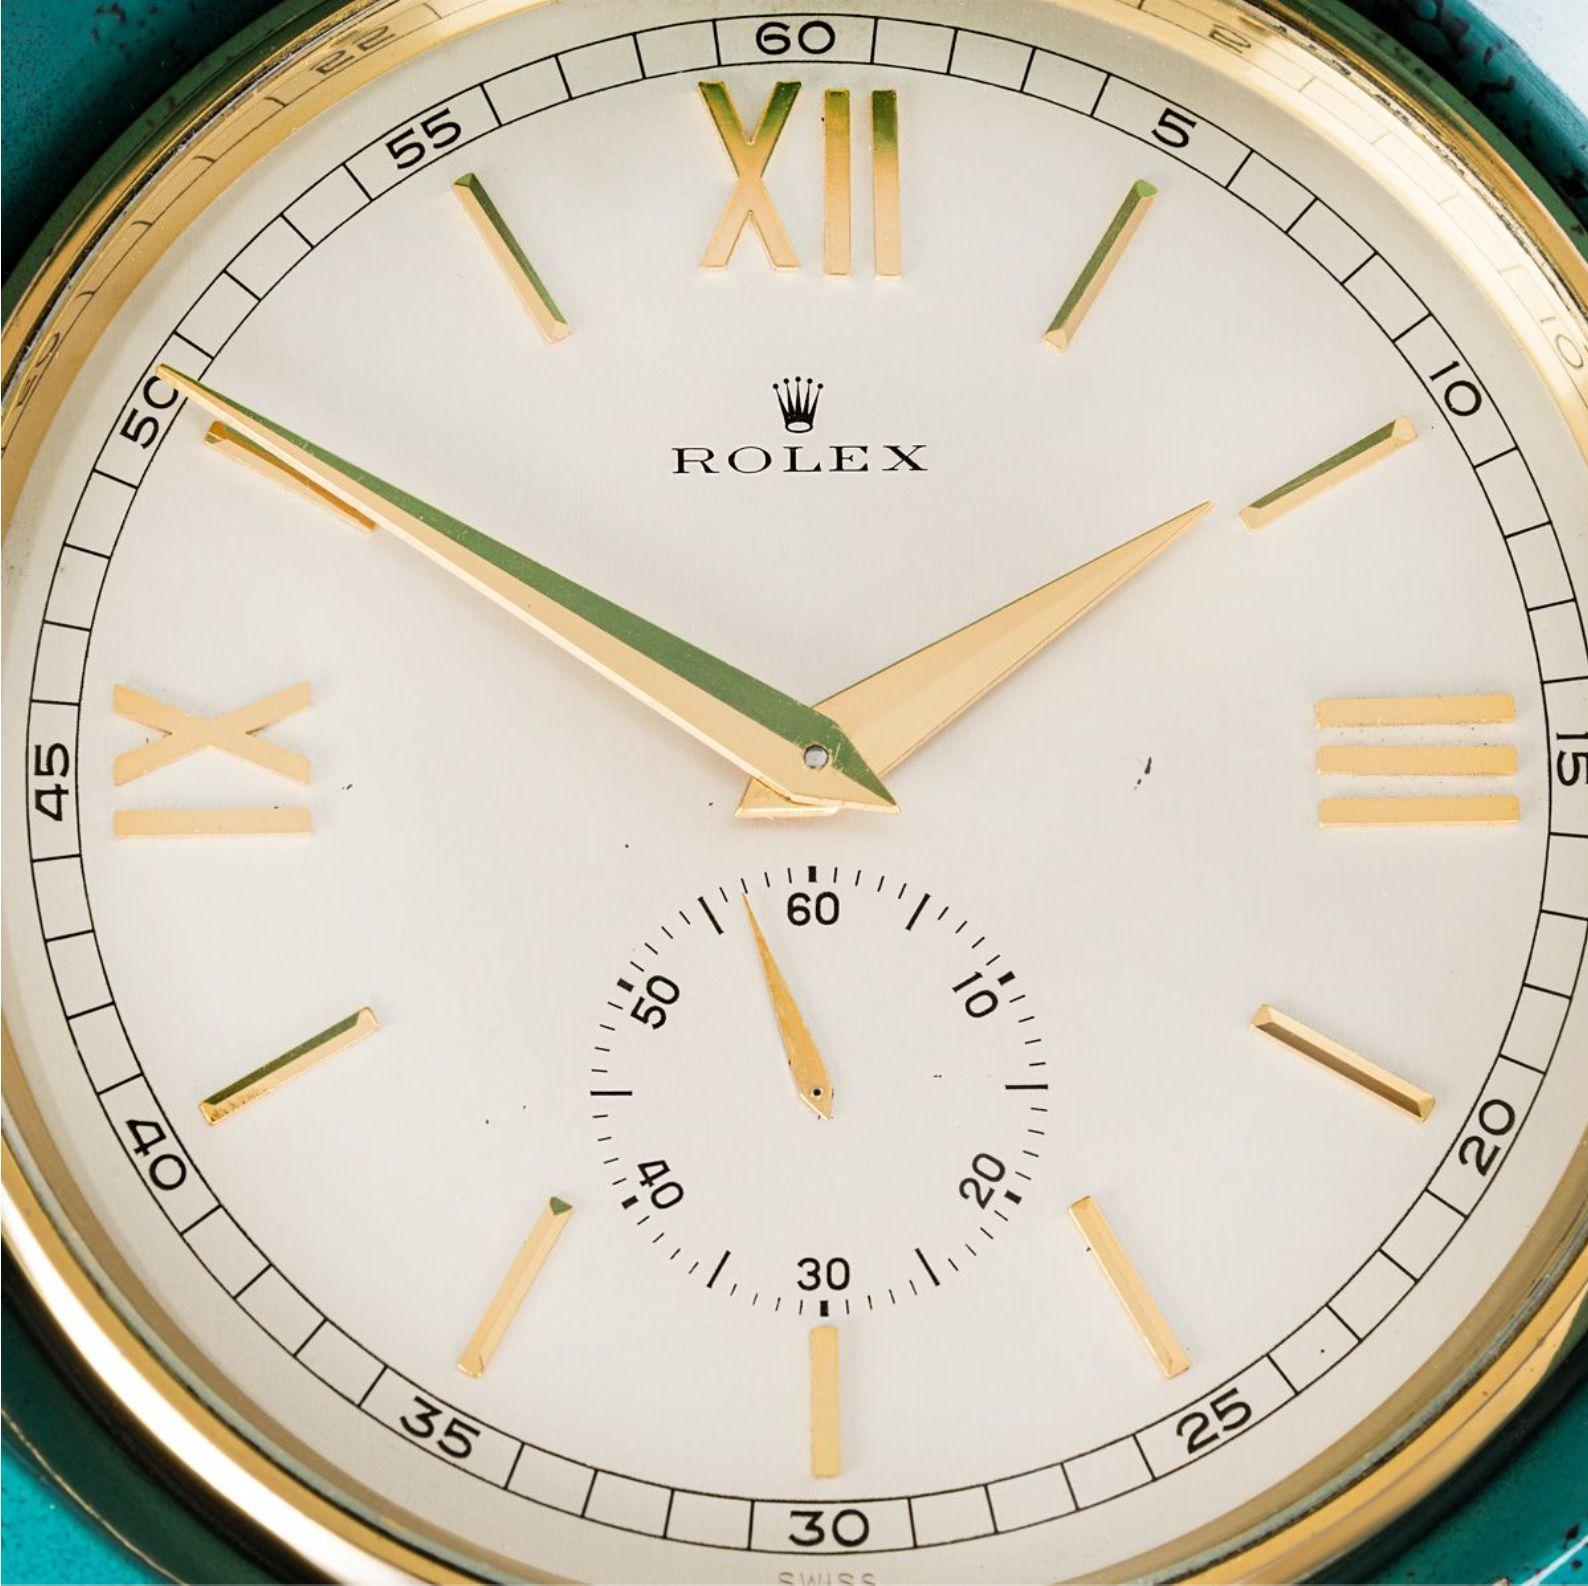 Rolex. A Gilt Brass Painted Horseshoe-shaped Desk Clock, La Hora Al Secundo with Original Wooden Presentation Box C1960.

Dial: A Matt Silvered Dial, Signed Rolex, with applied Roman numerals, outer minute track subsidiary seconds dial at six with